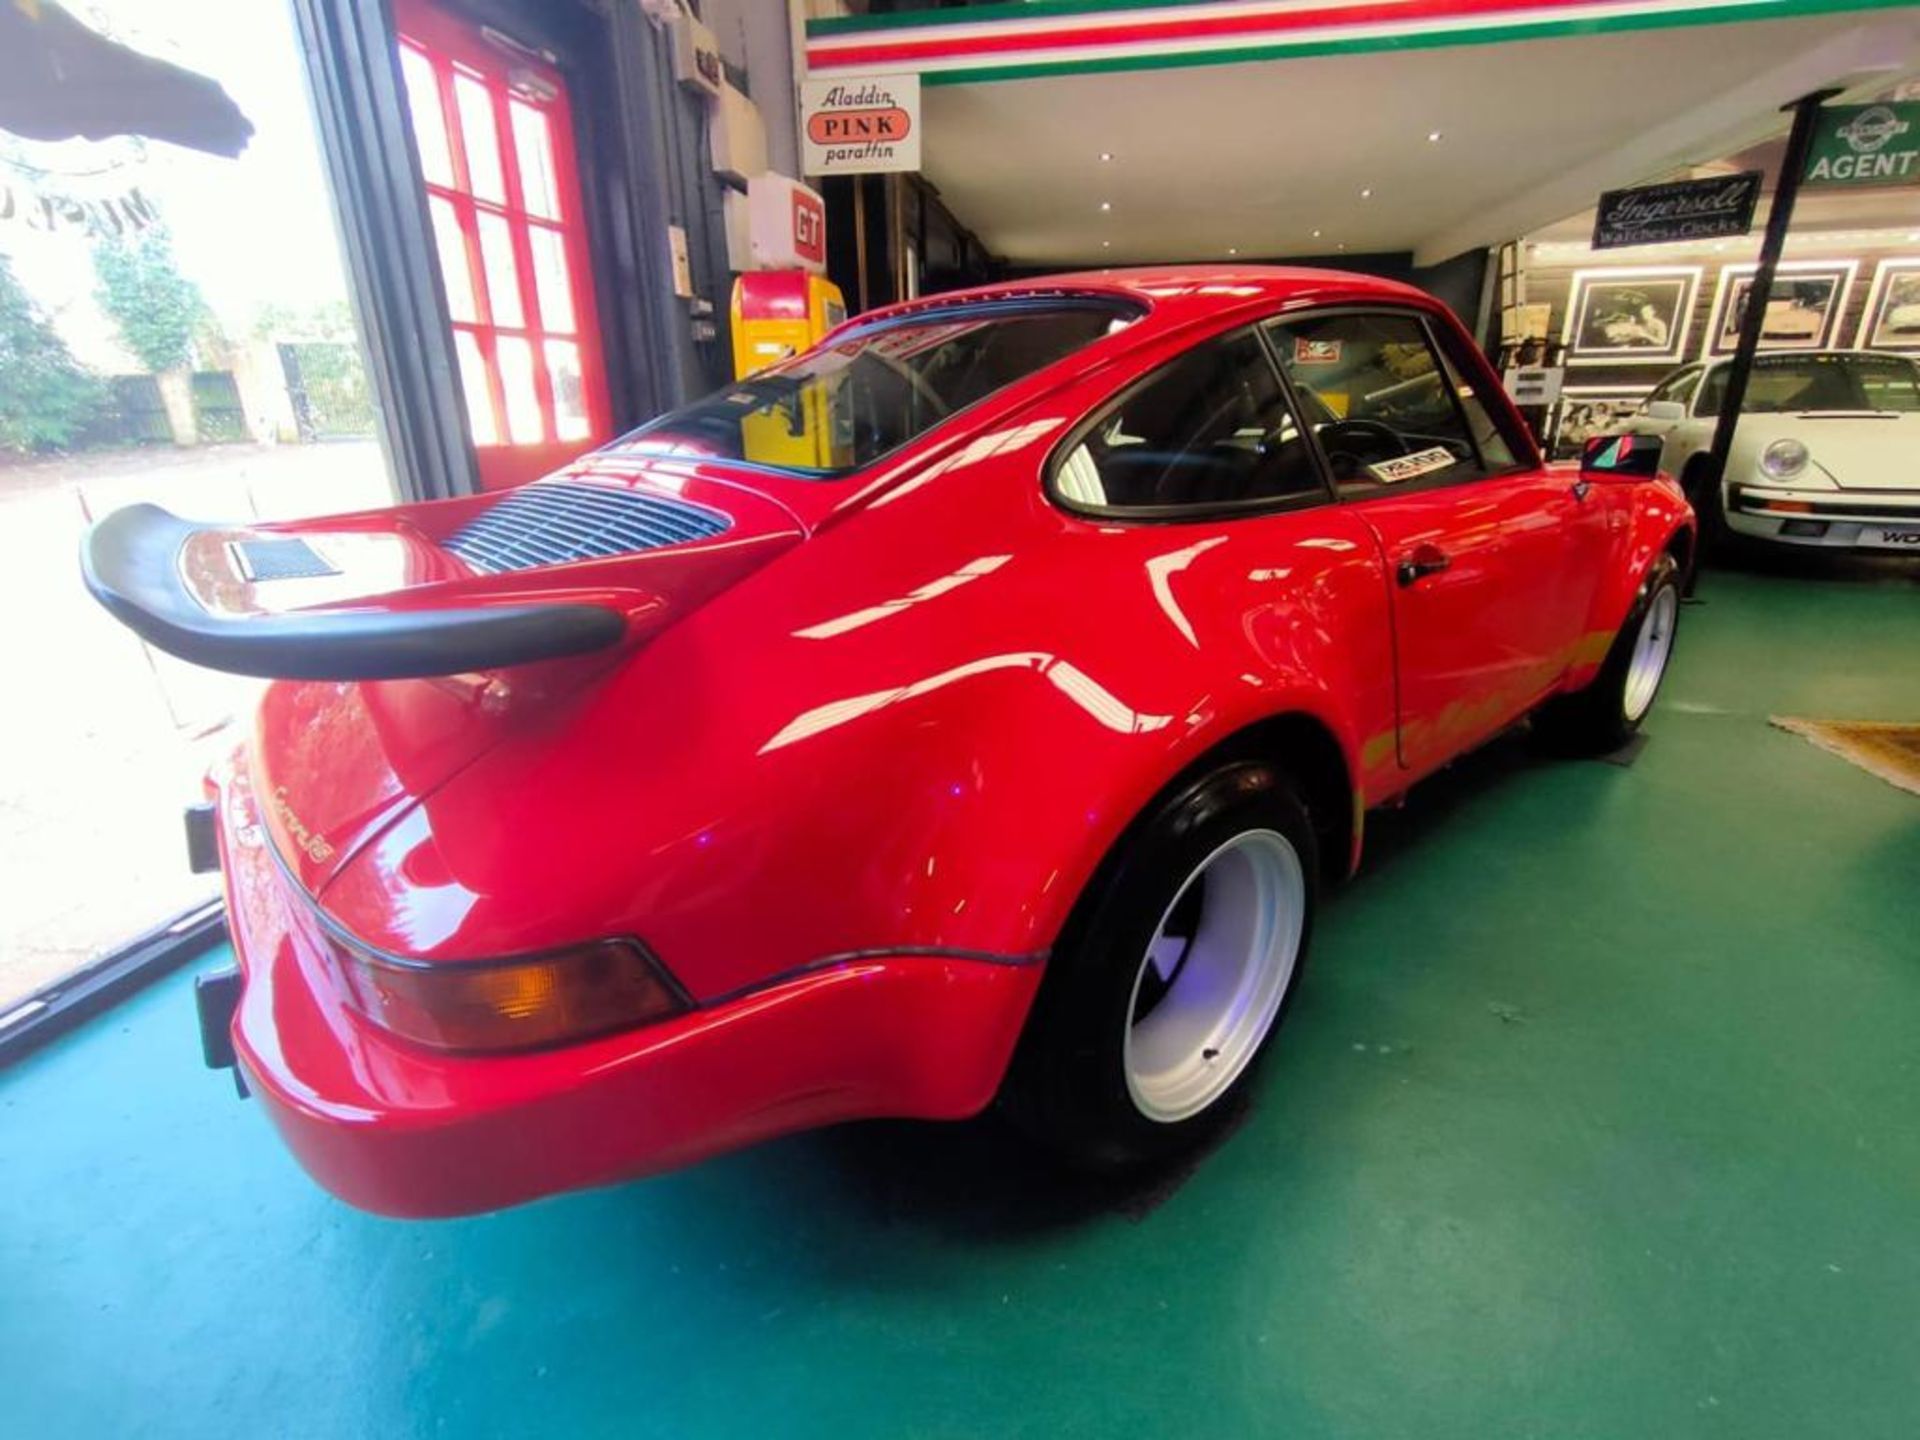 1980 PORSCHE 911 SC SPORT WHICH HAS BEEN FULLY REBUILT TO BE IDENTICAL TO A 1974 911 RSR *NO VAT* - Image 5 of 12